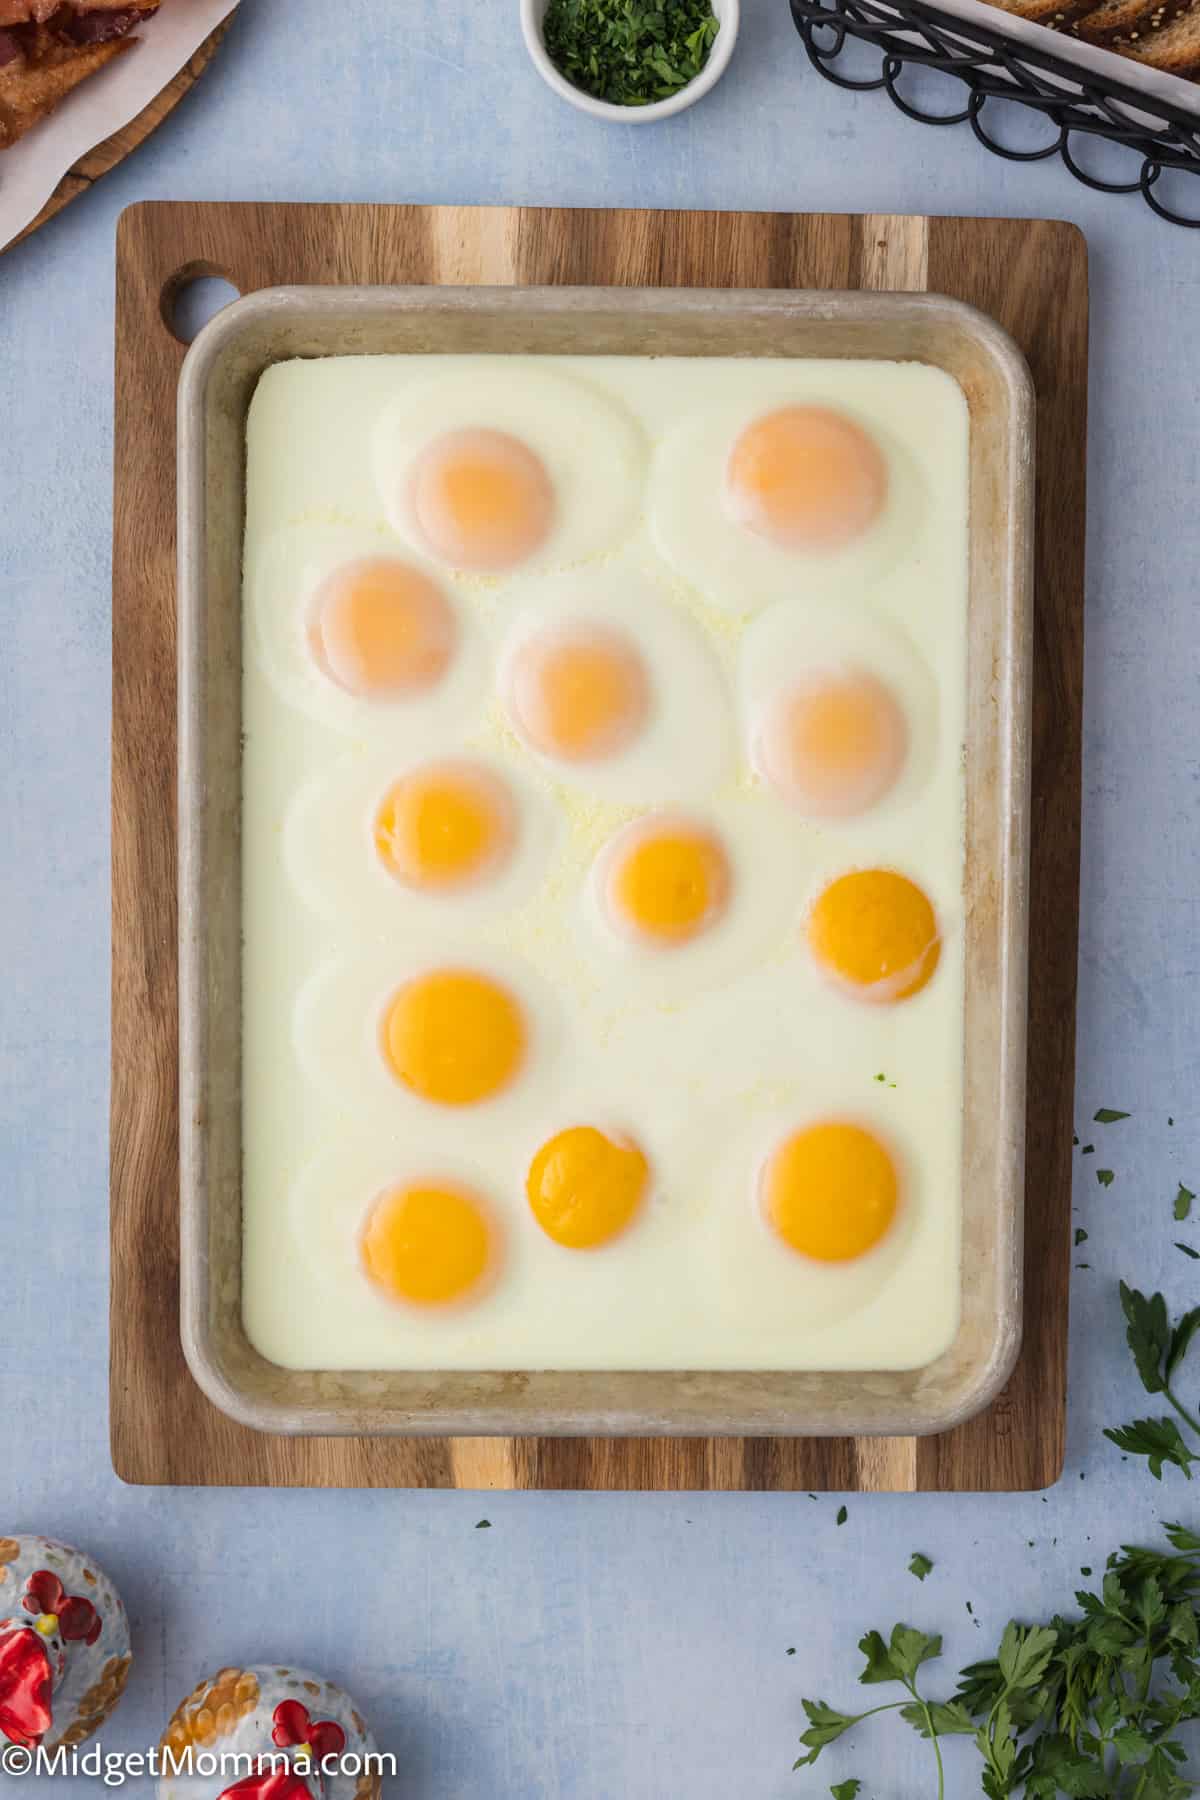 Sheet Pan Fried Eggs Recipe (Sunny Side Up Baked Eggs)